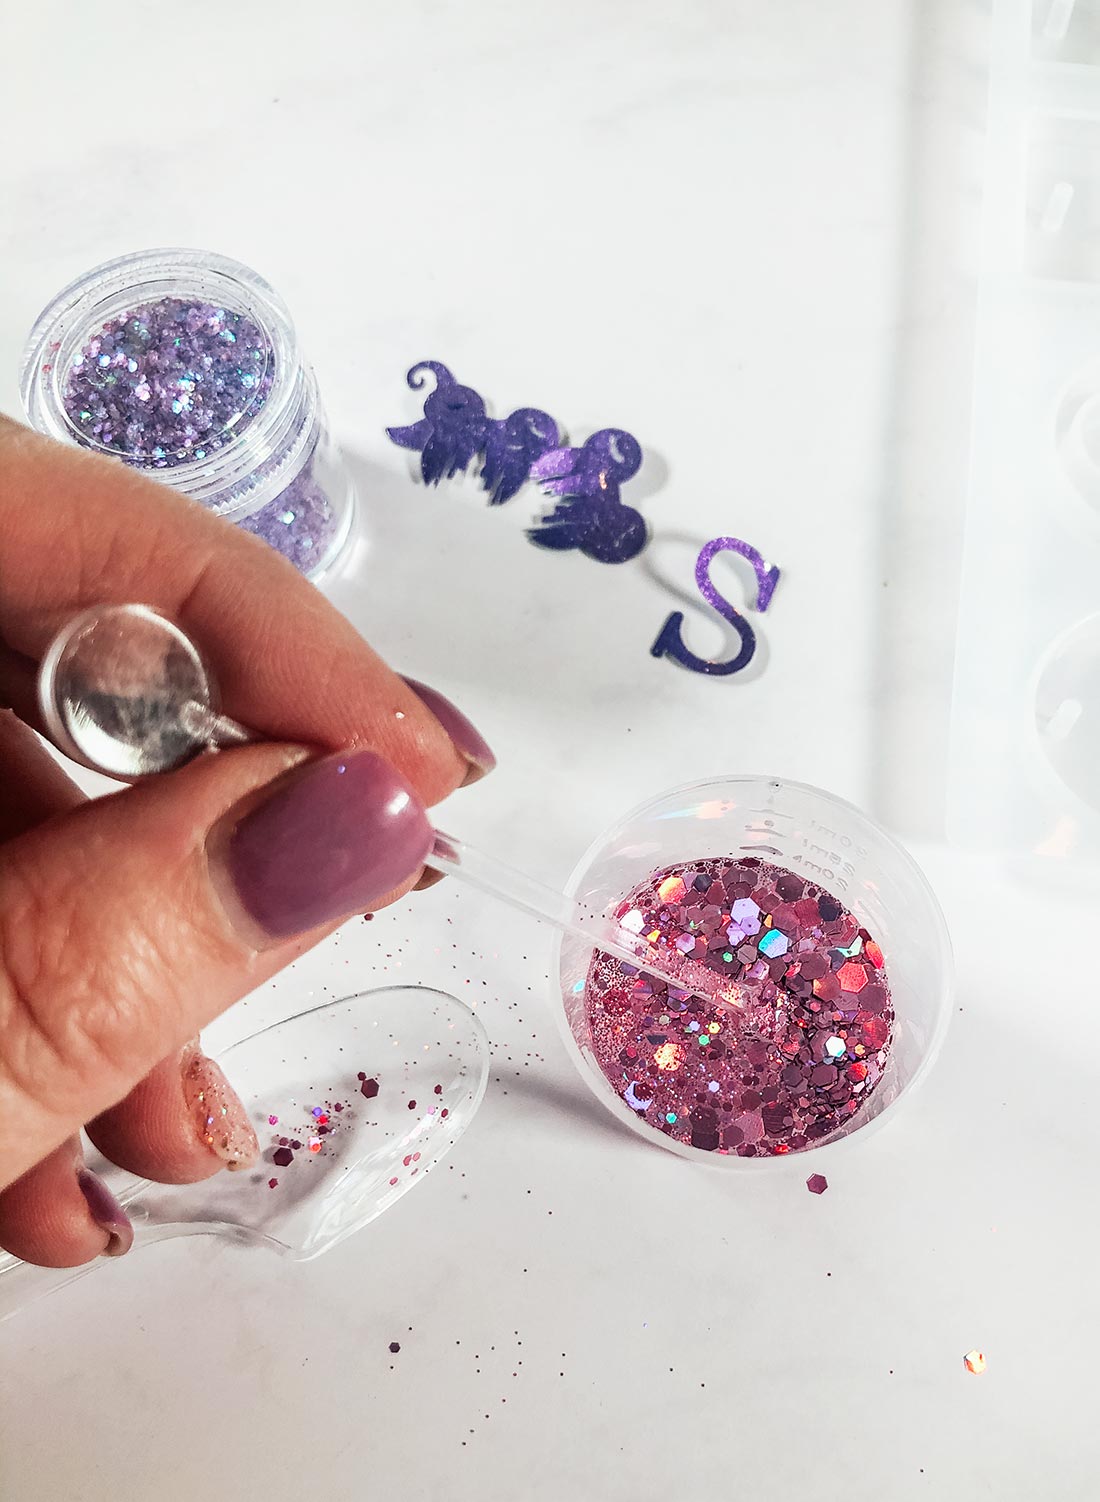 You can mix the glitter into your resin or sprinkle it in the encapsulate